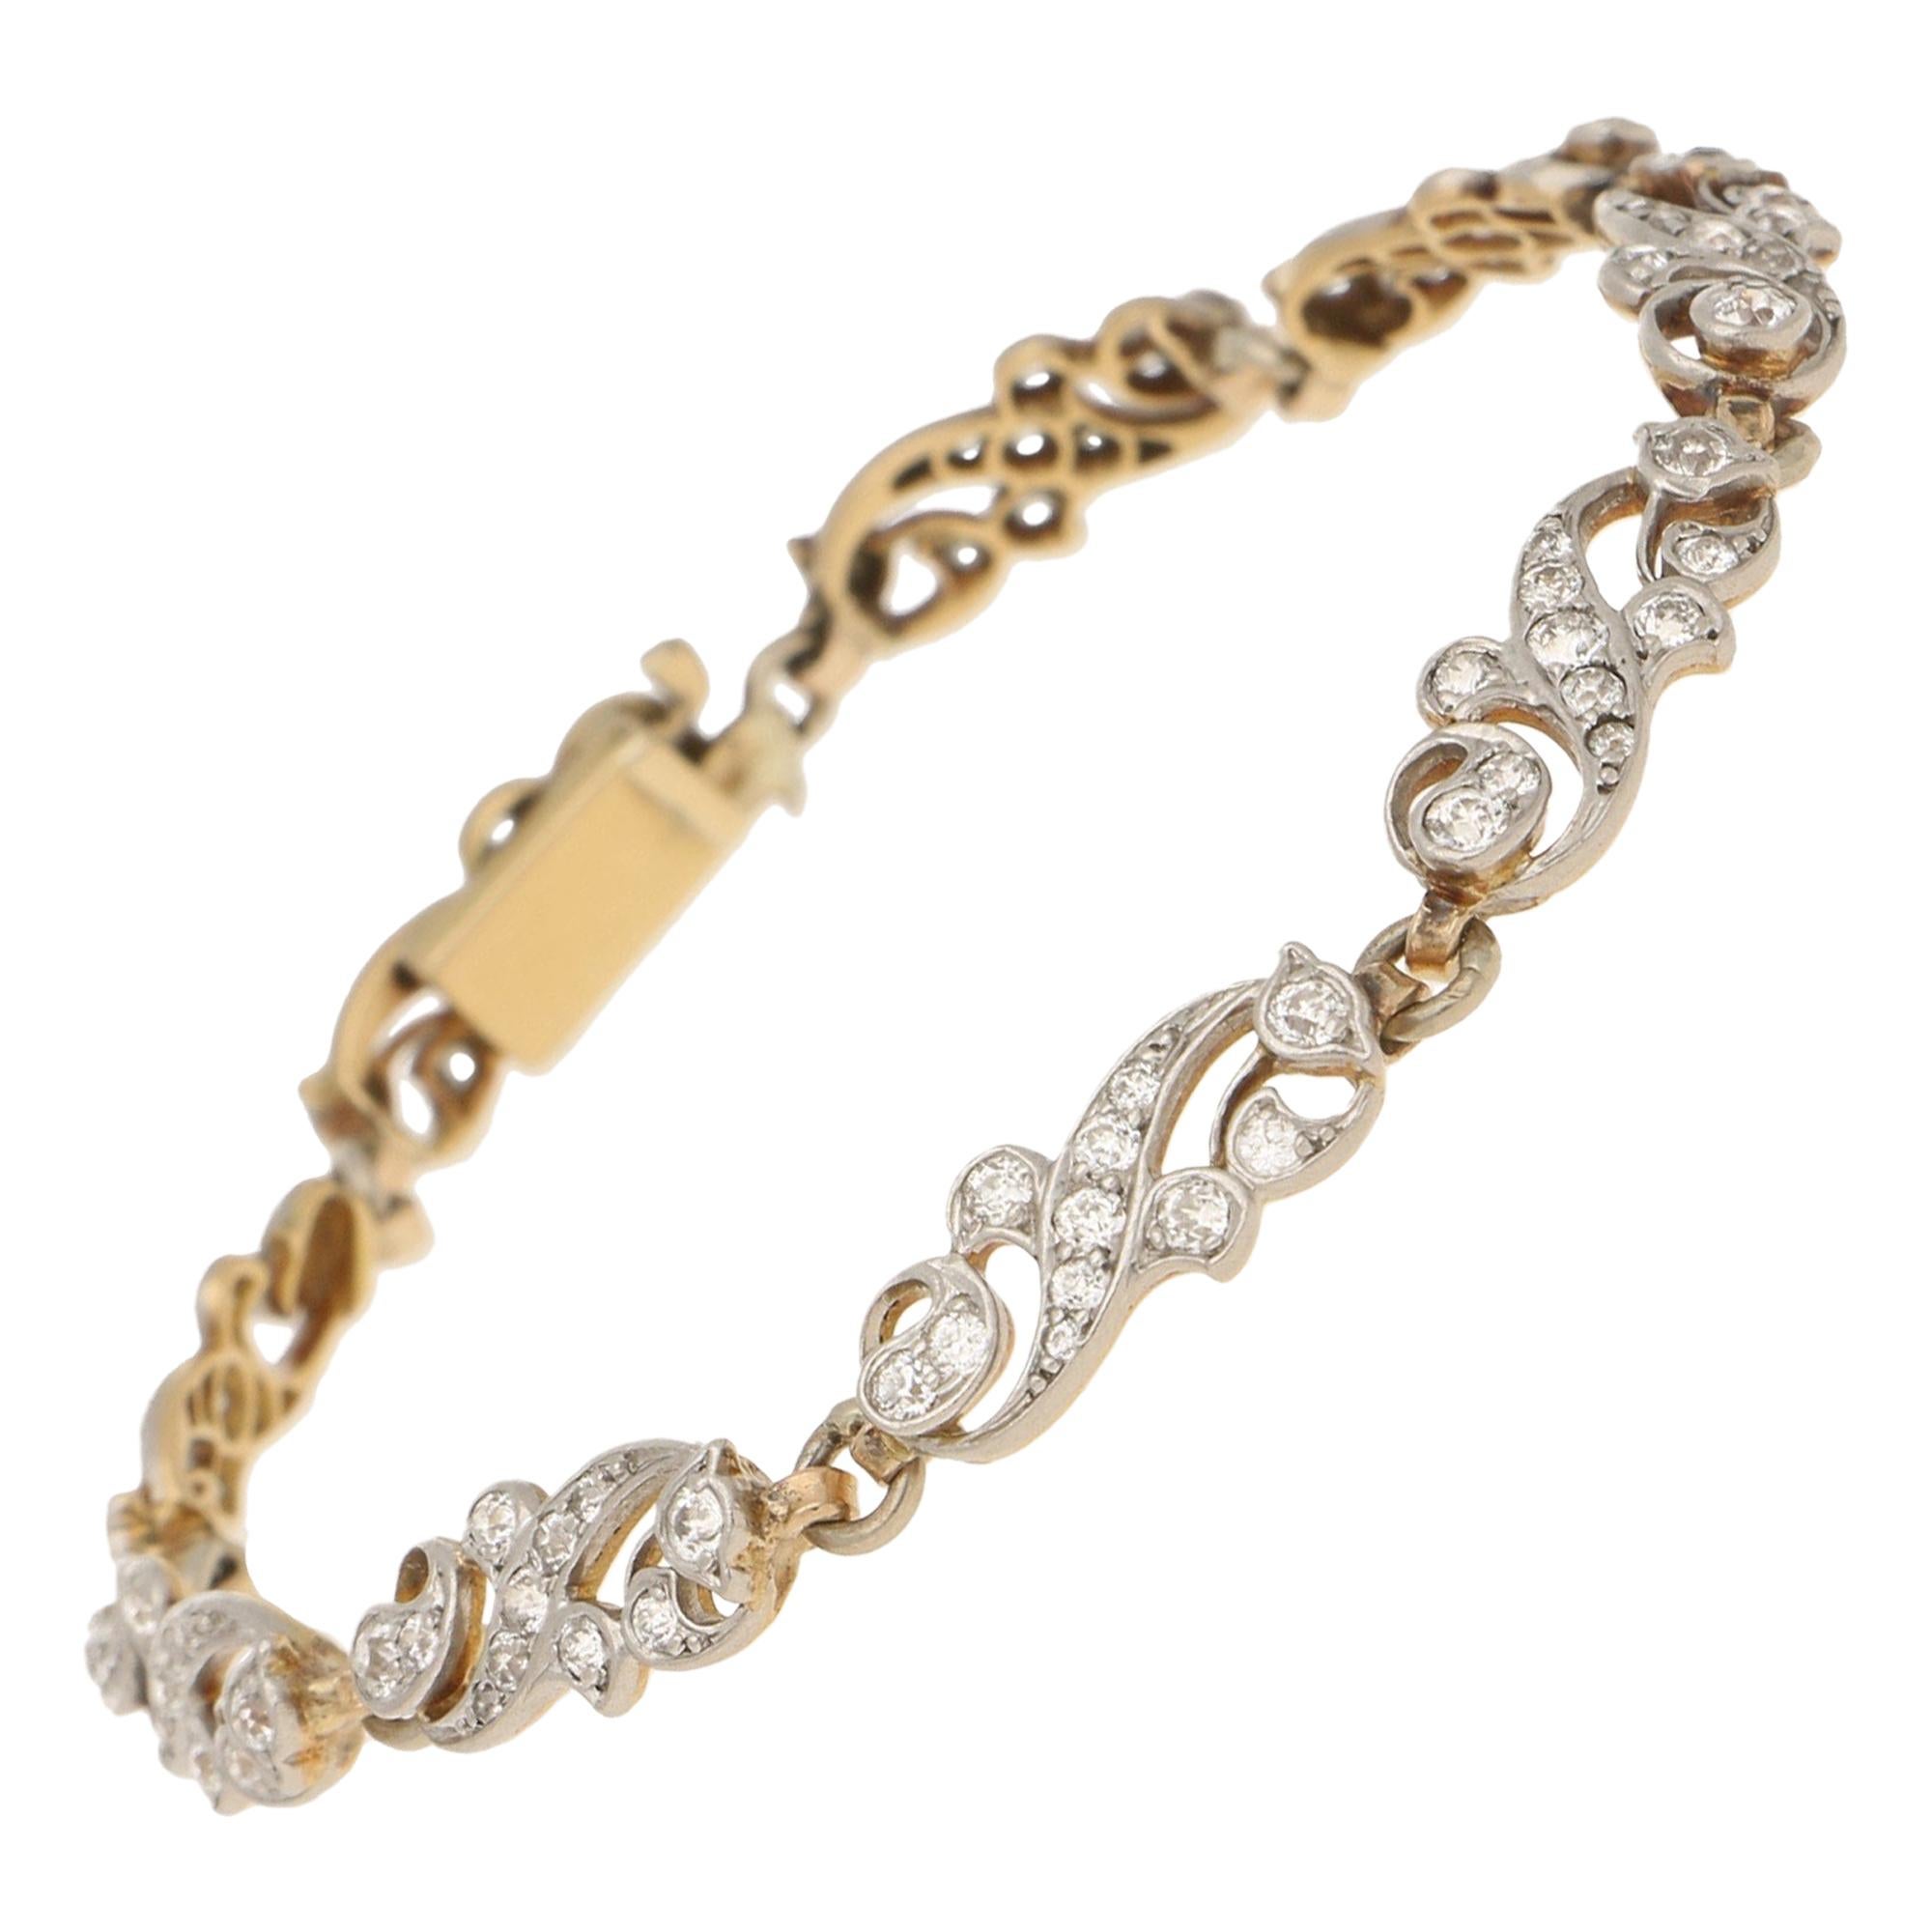 Victorian Scrolled Diamond Bracelet in Silver-on-Gold 2.70cts 